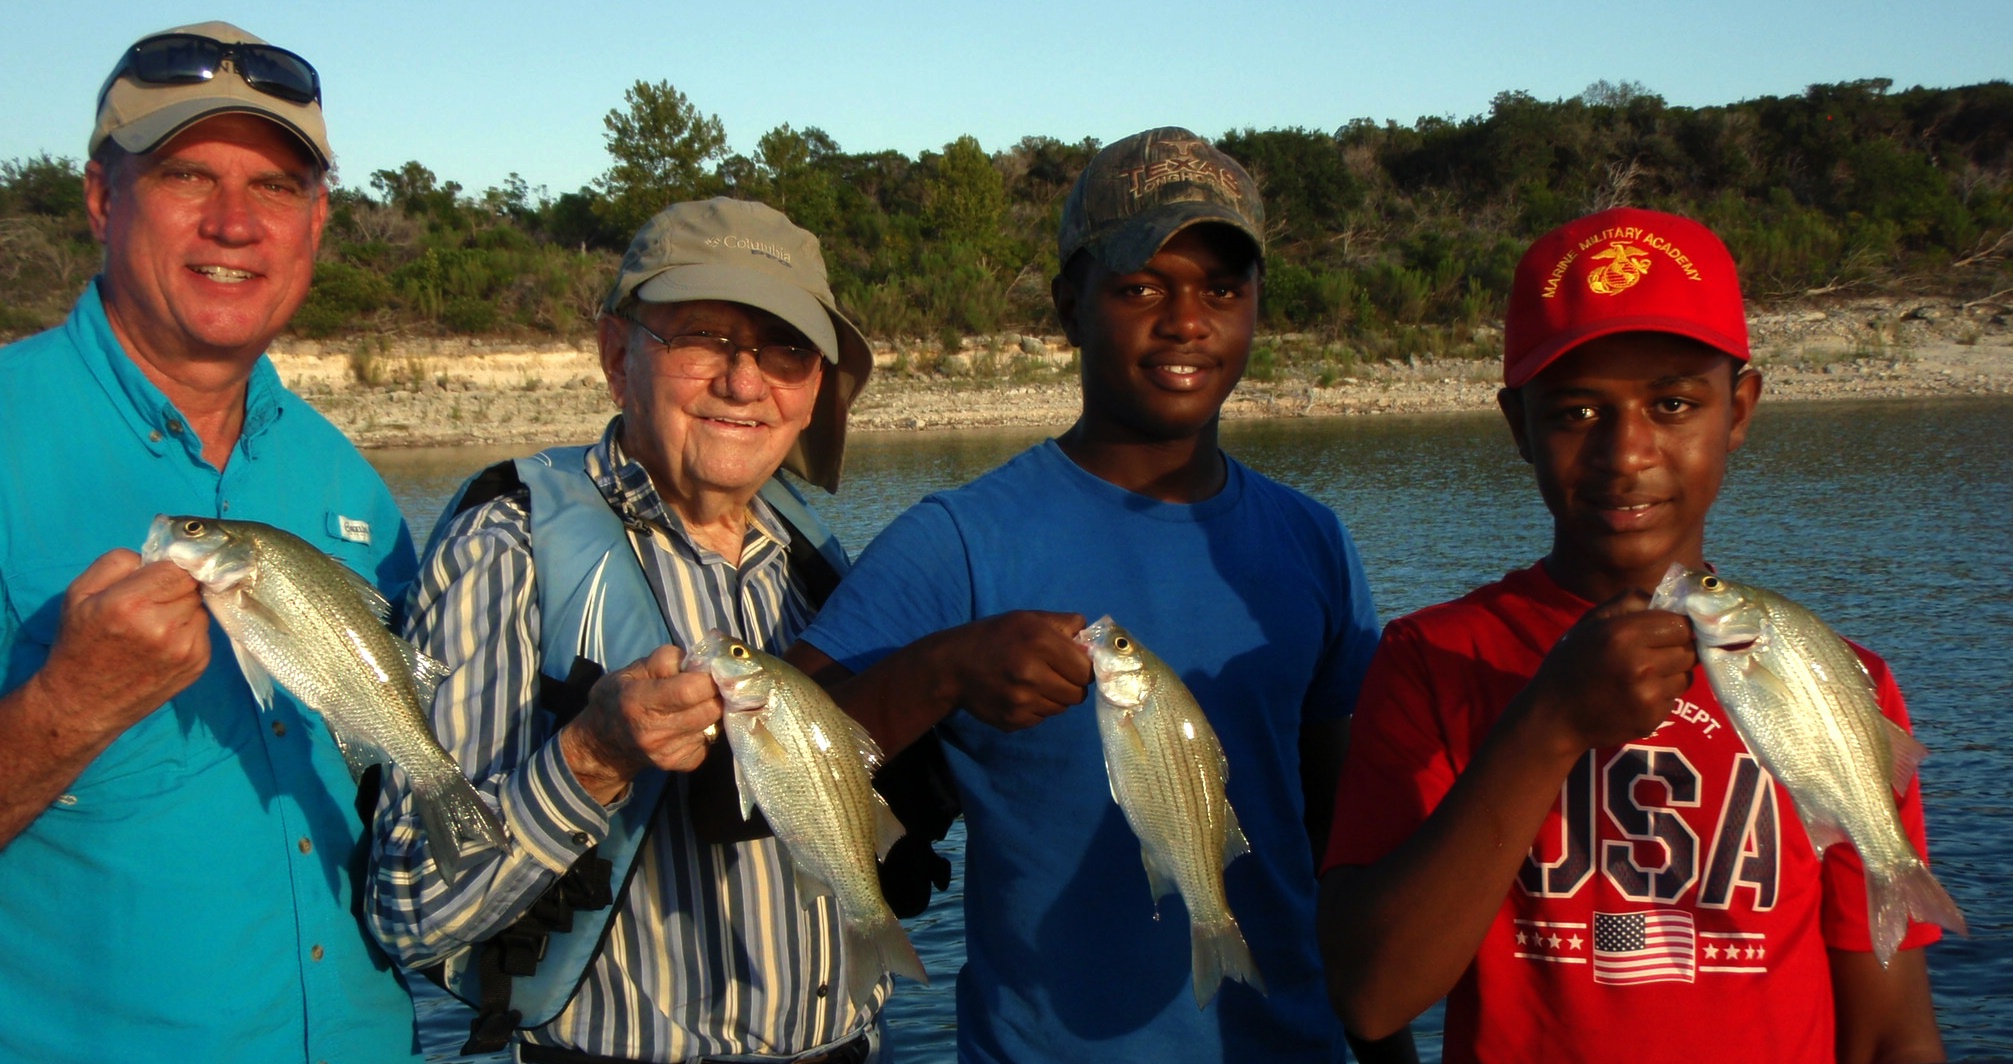 The lure of fishing: Salado guide creates booming business